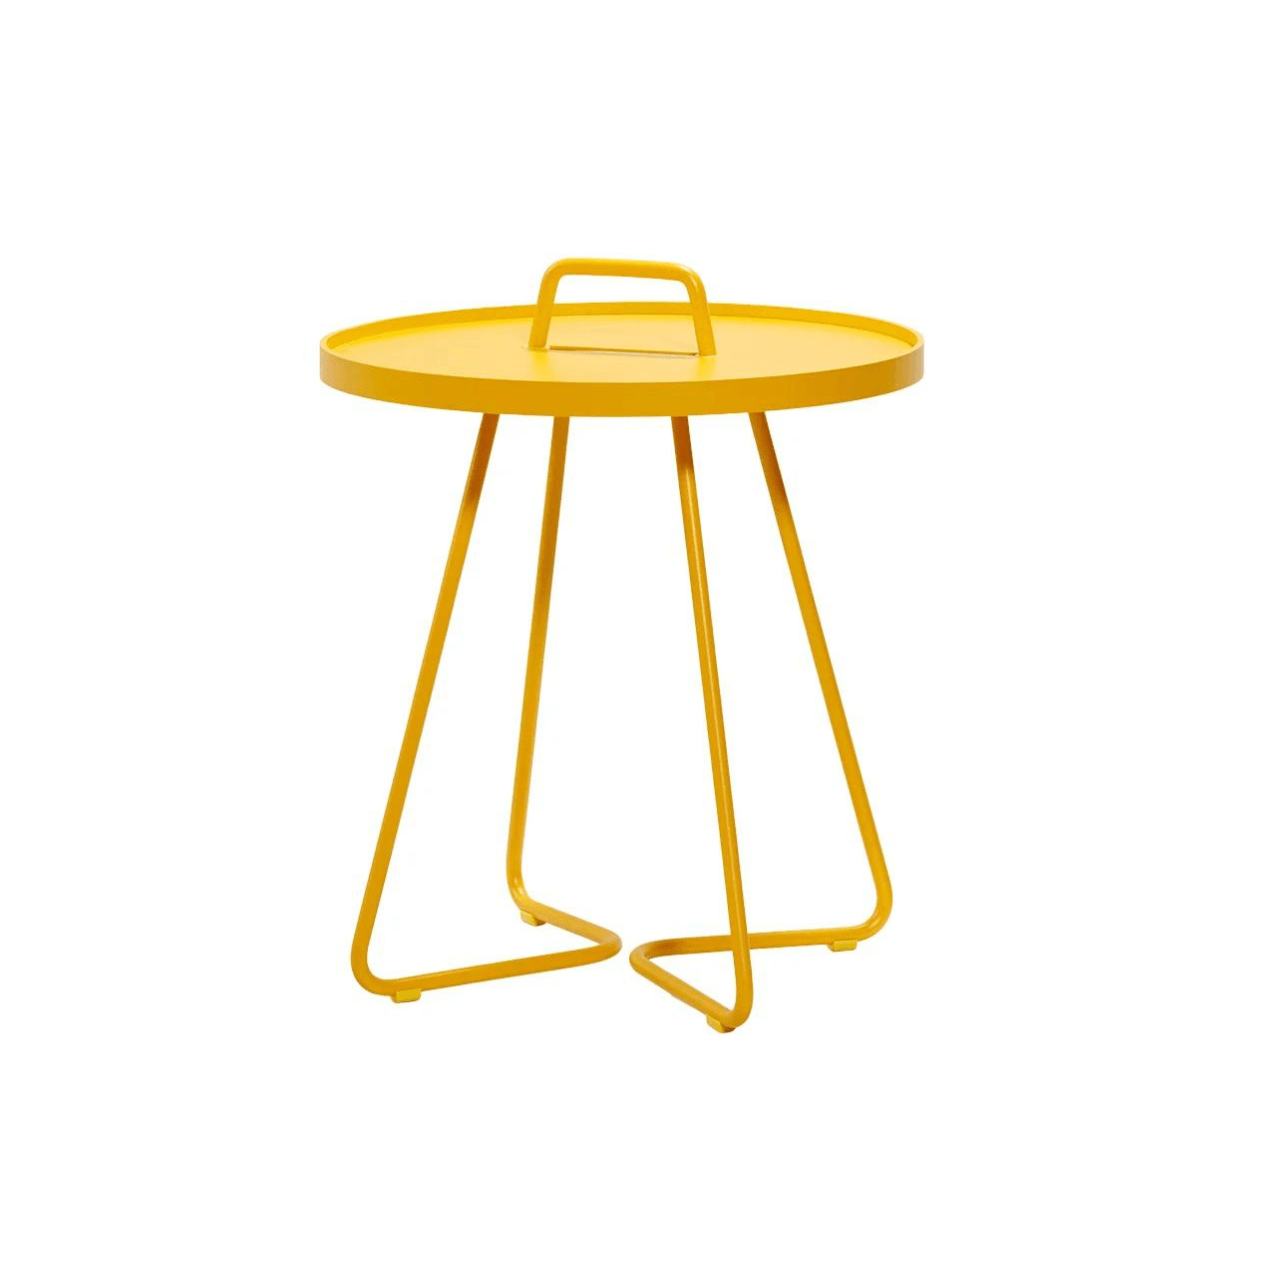 Boxhill's On-The-Move yellow outdoor round side table on white background